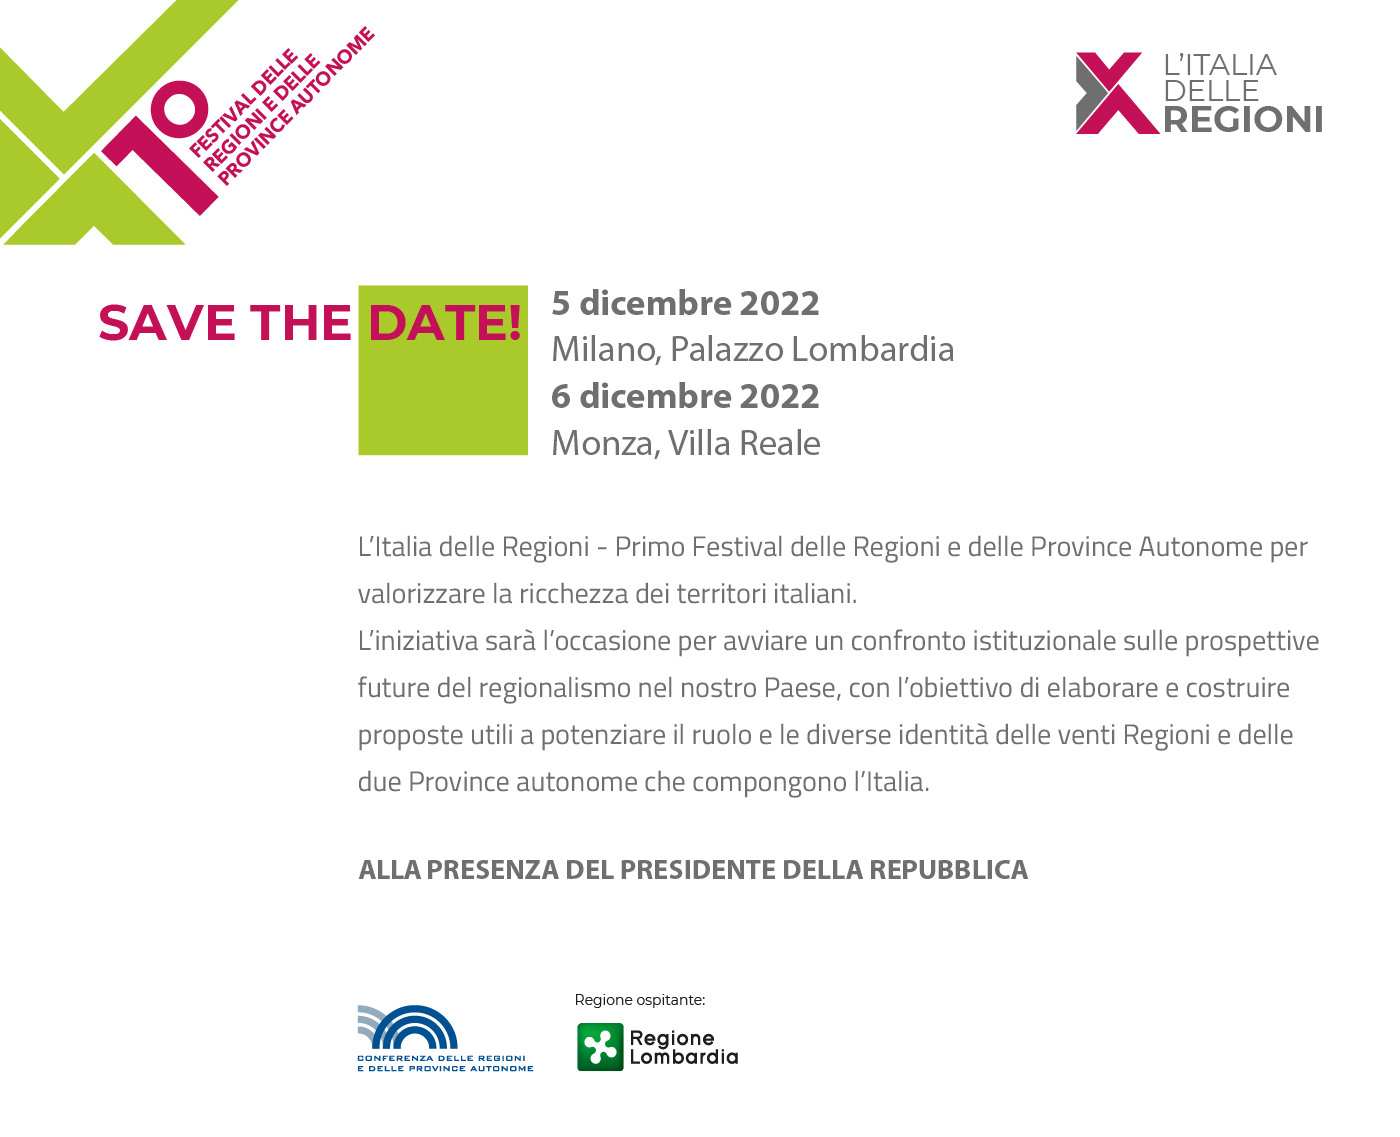 file/ELEMENTO_NEWSLETTER/24926/Save-the-date_UFFICIALE_festival_regioni_5_6_12_22_NL.png